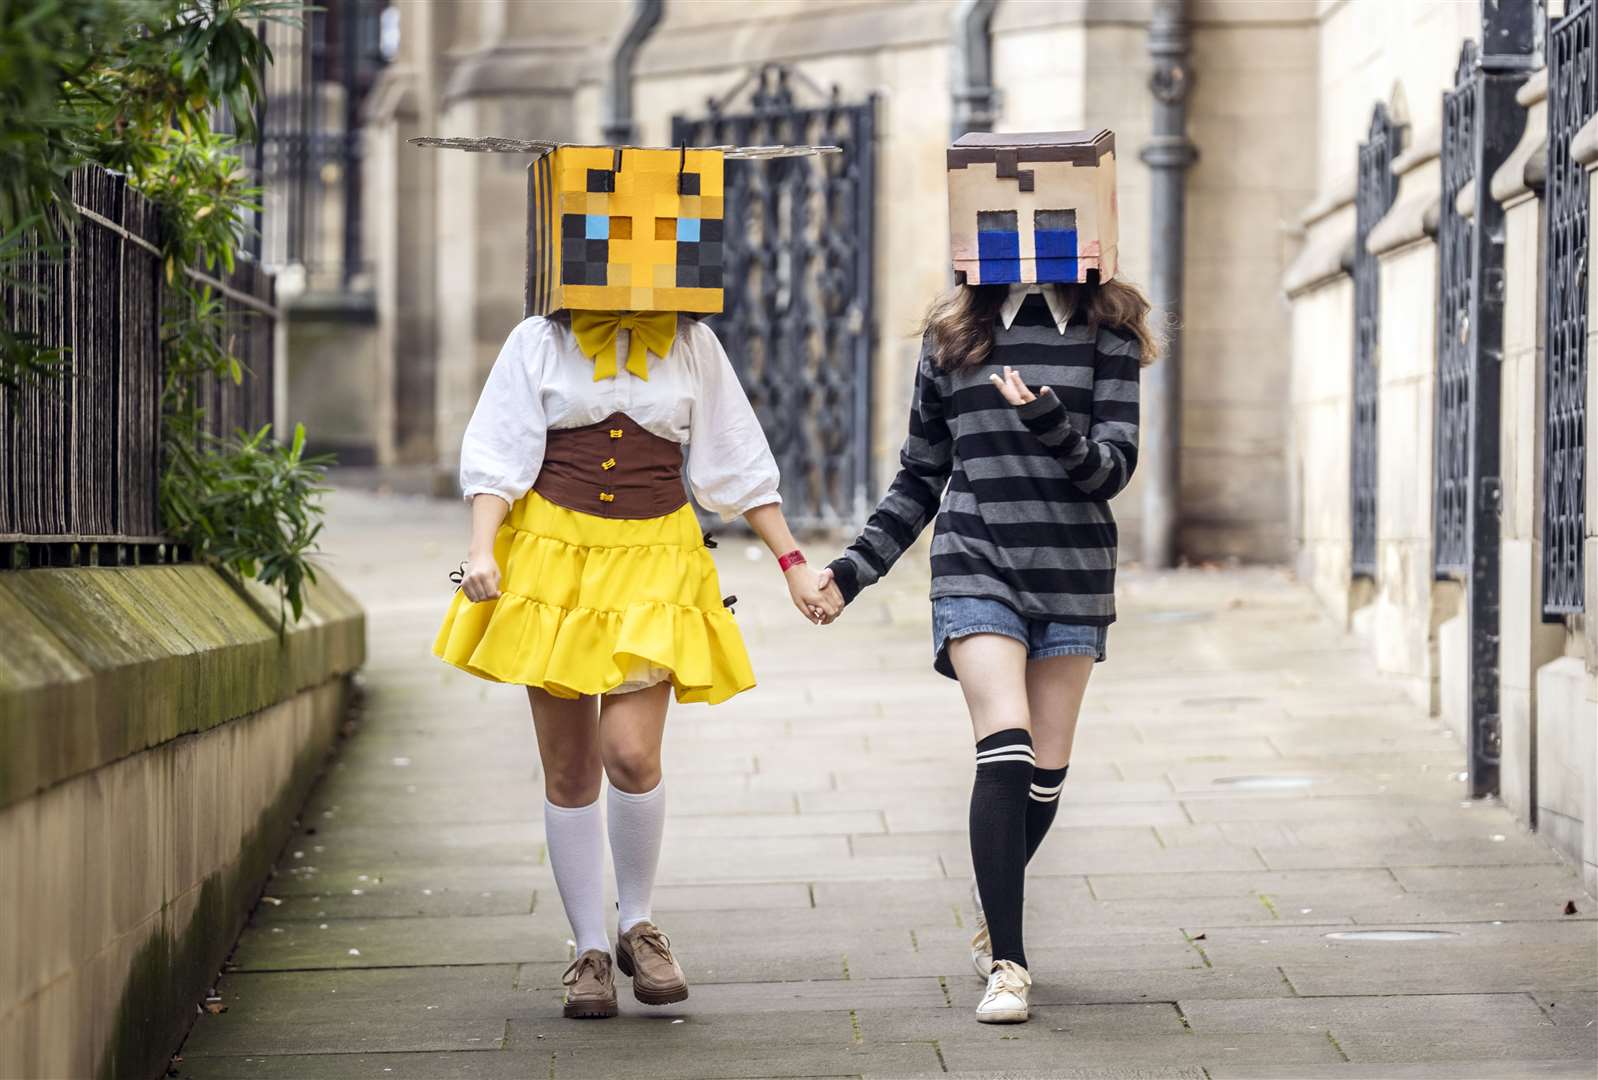 People in costume as a Minecraft bee (left) and Crying Child from Five Nights At Freddy’s 4 (right) (Danny Lawson/PA)